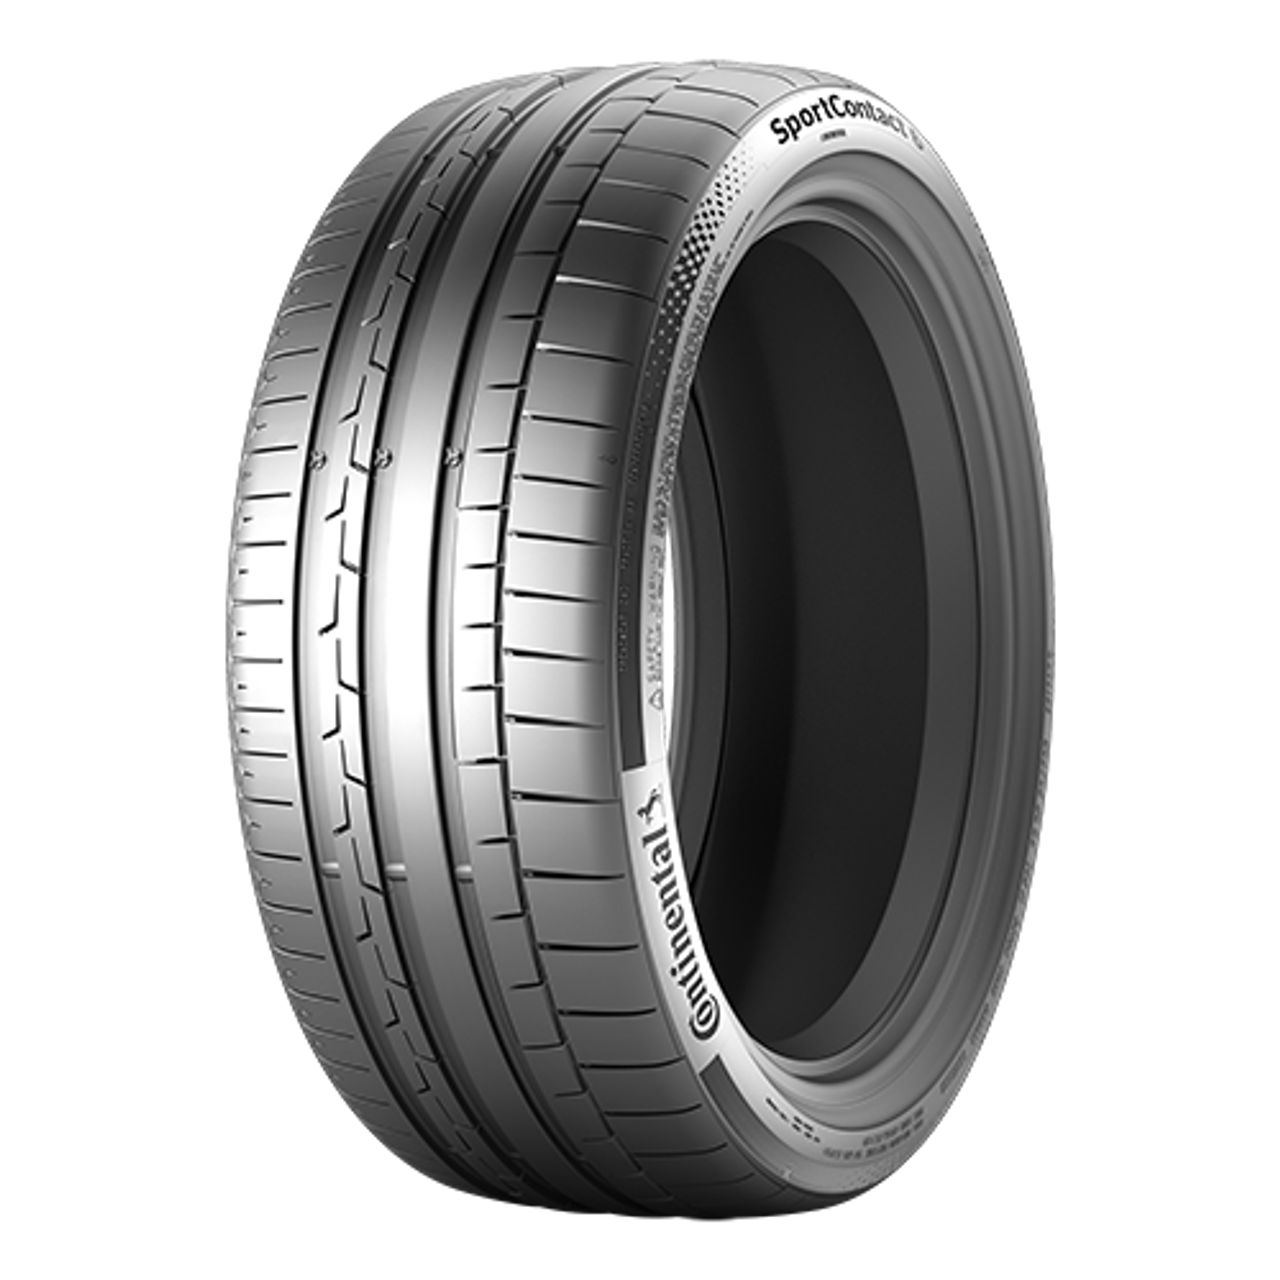 CONTINENTAL SPORTCONTACT 6 (MGT) (EVc) 265/45ZR20 108Y